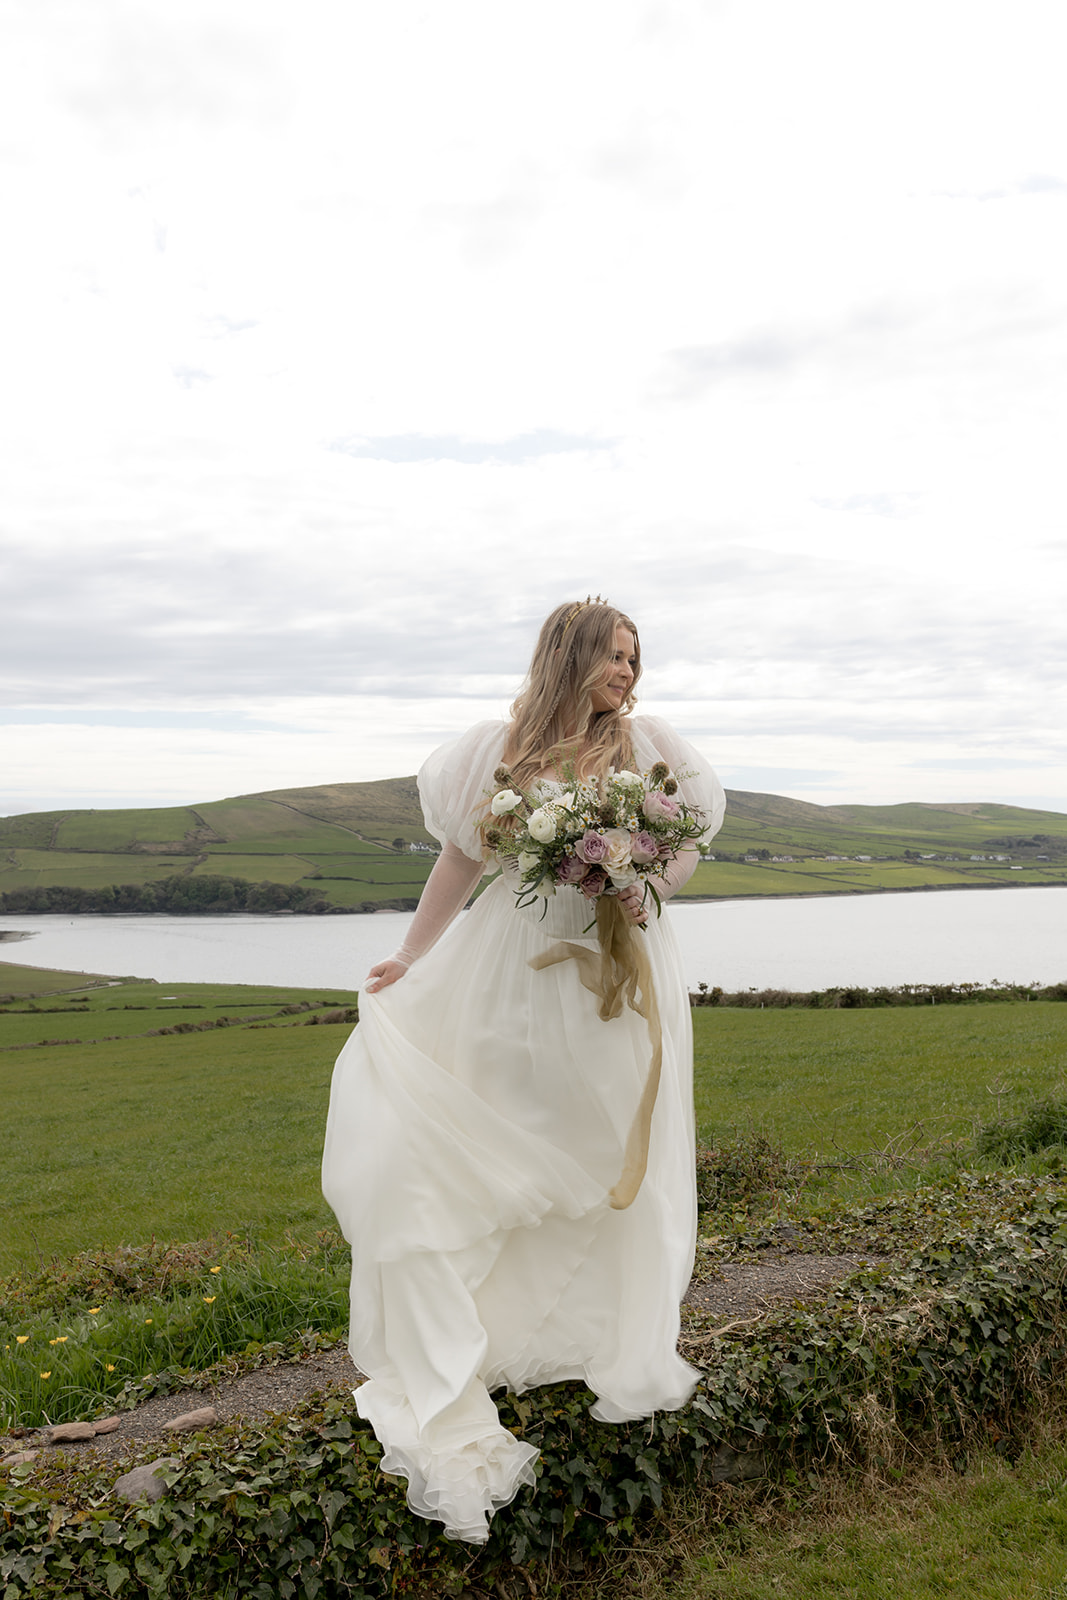 Bride posing on small wall for irish elopement photos with water and hills in the background